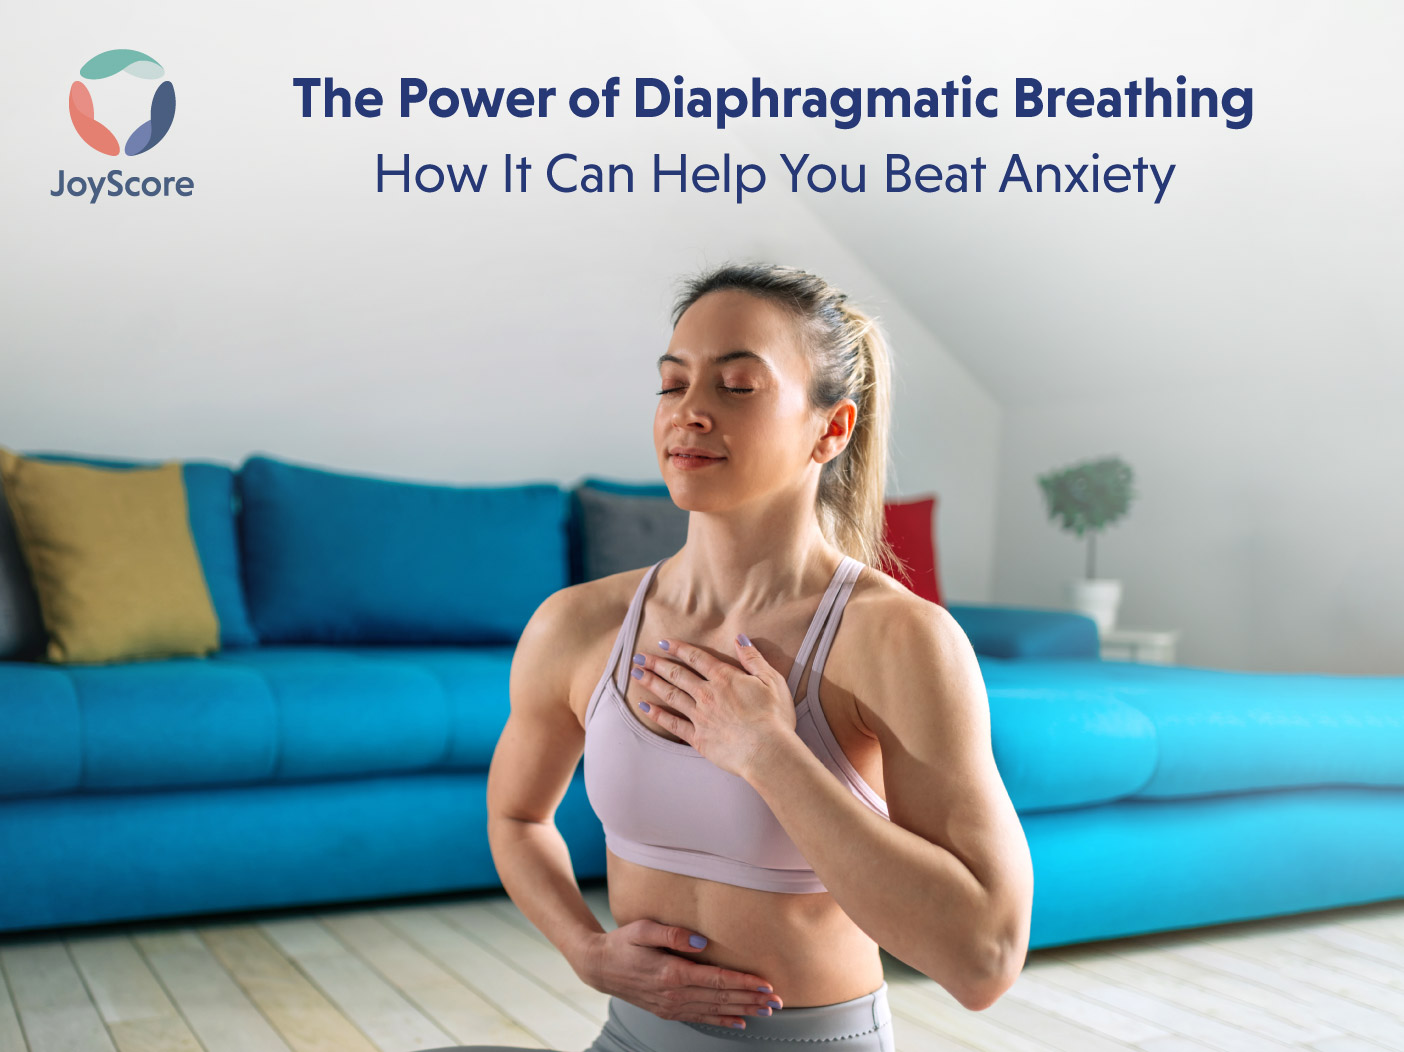 The Power of Diaphragmatic Breathing